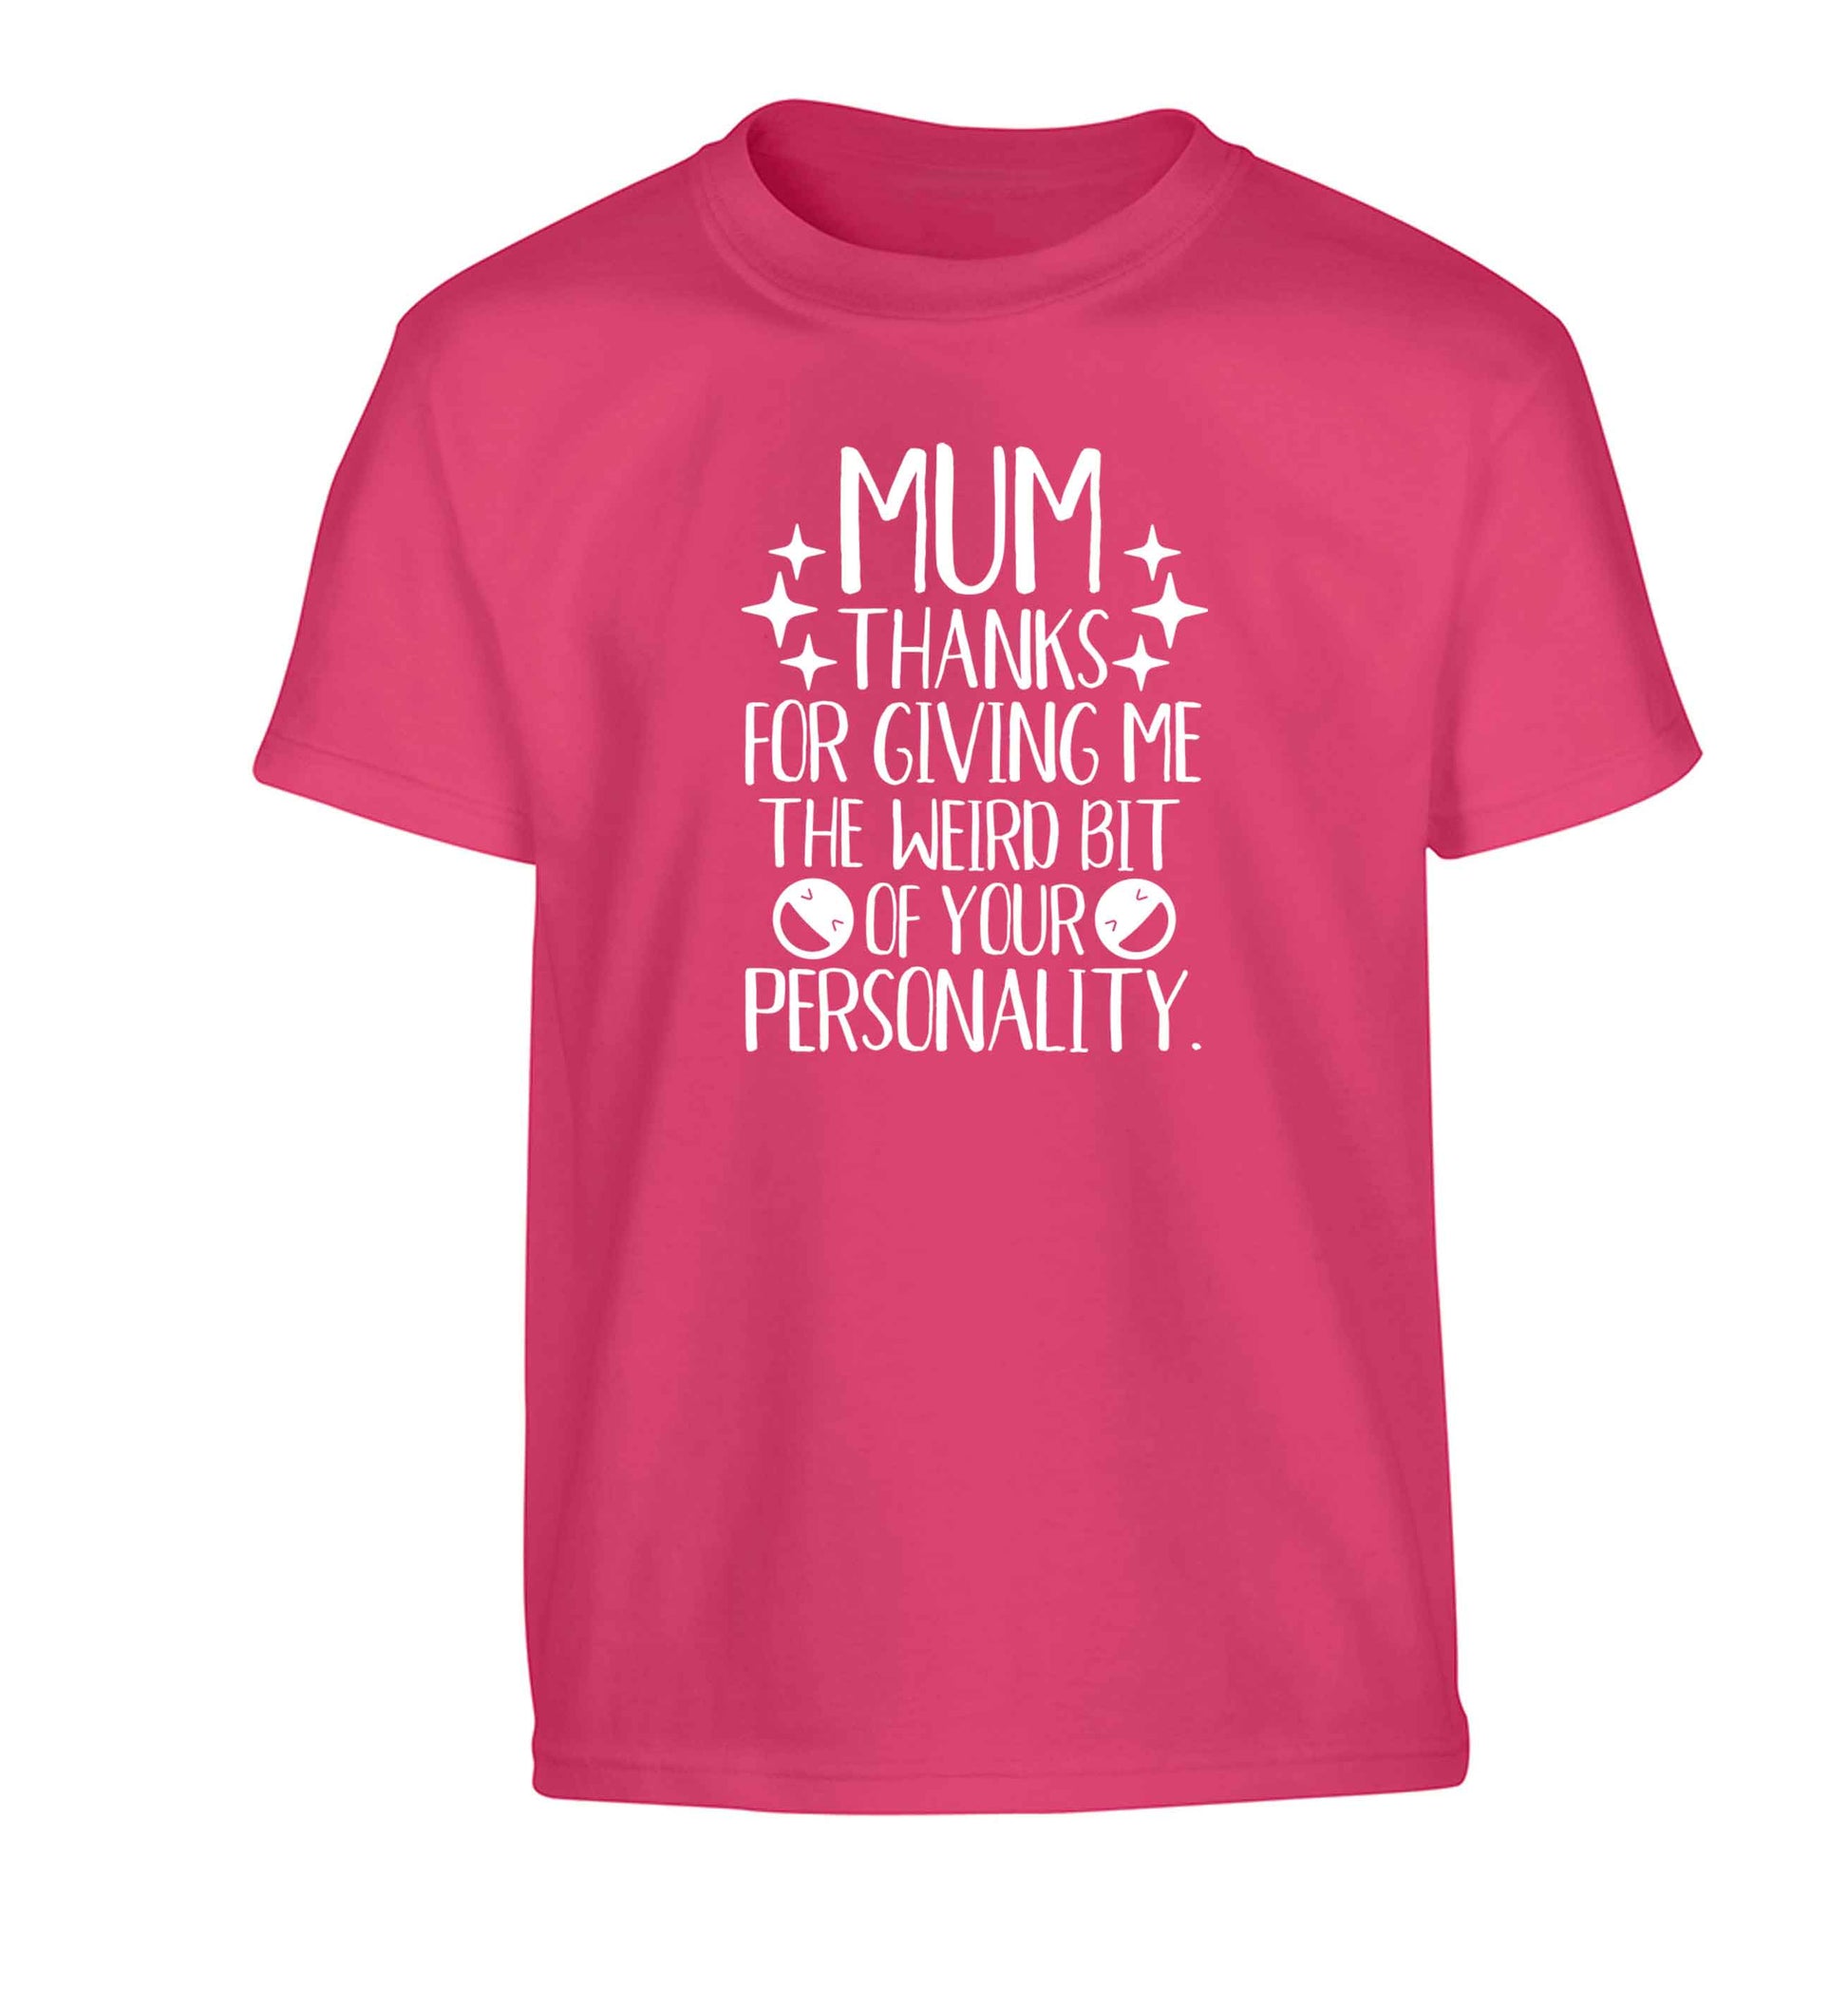 Mum, I love you more than halloumi and if you know me at all you know how deep that is Children's pink Tshirt 12-13 Years